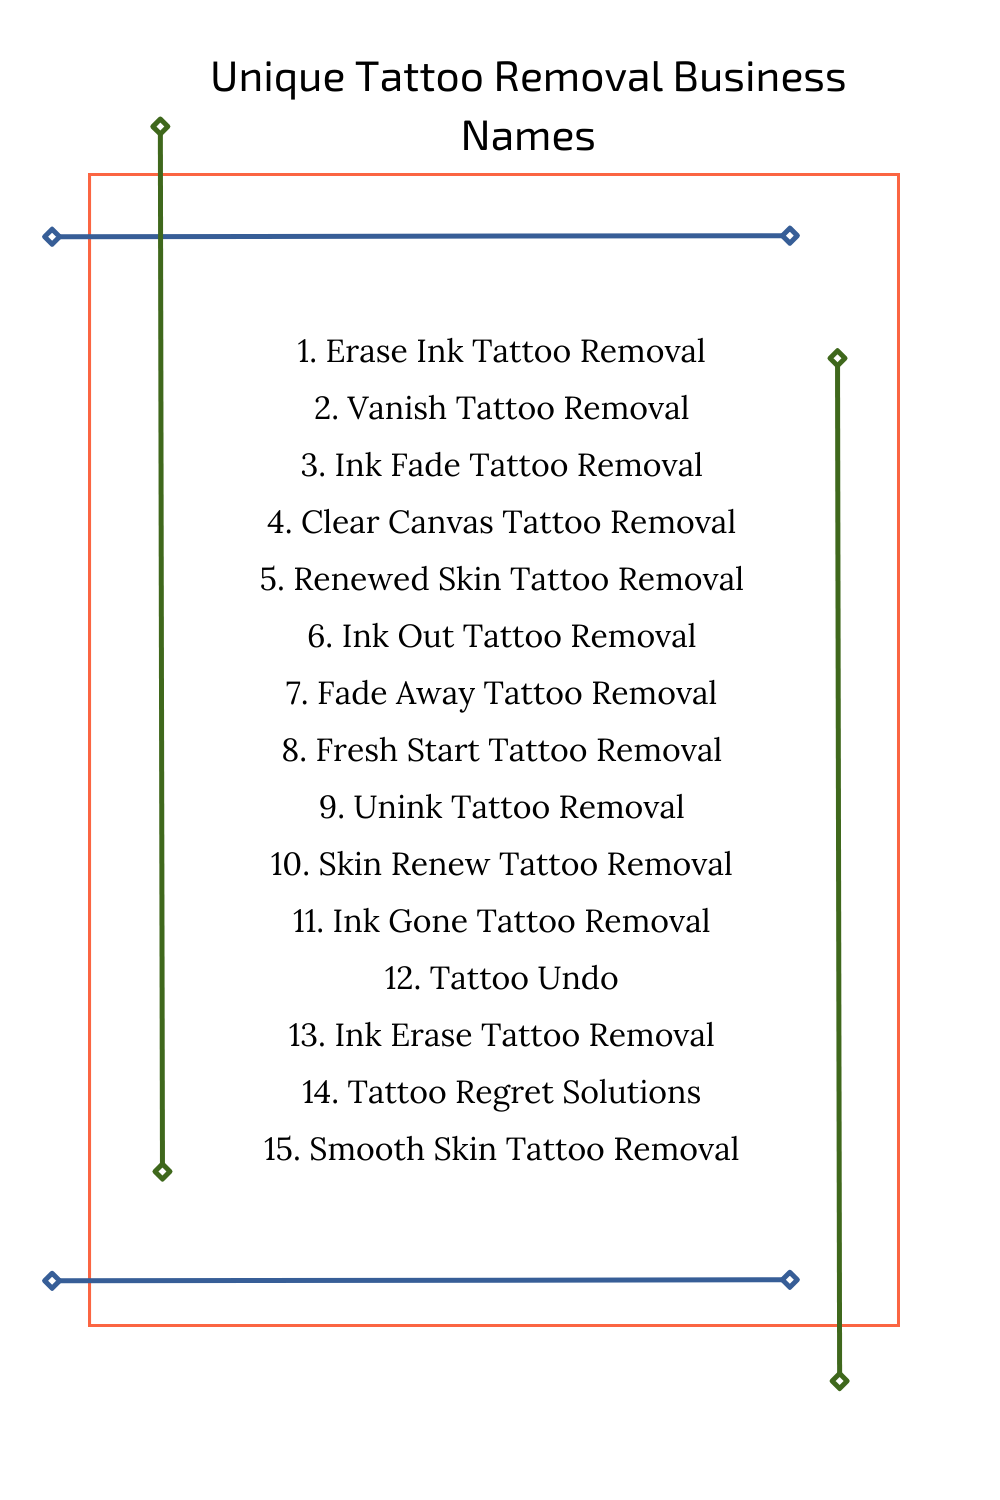 Unique Tattoo Removal Business Names